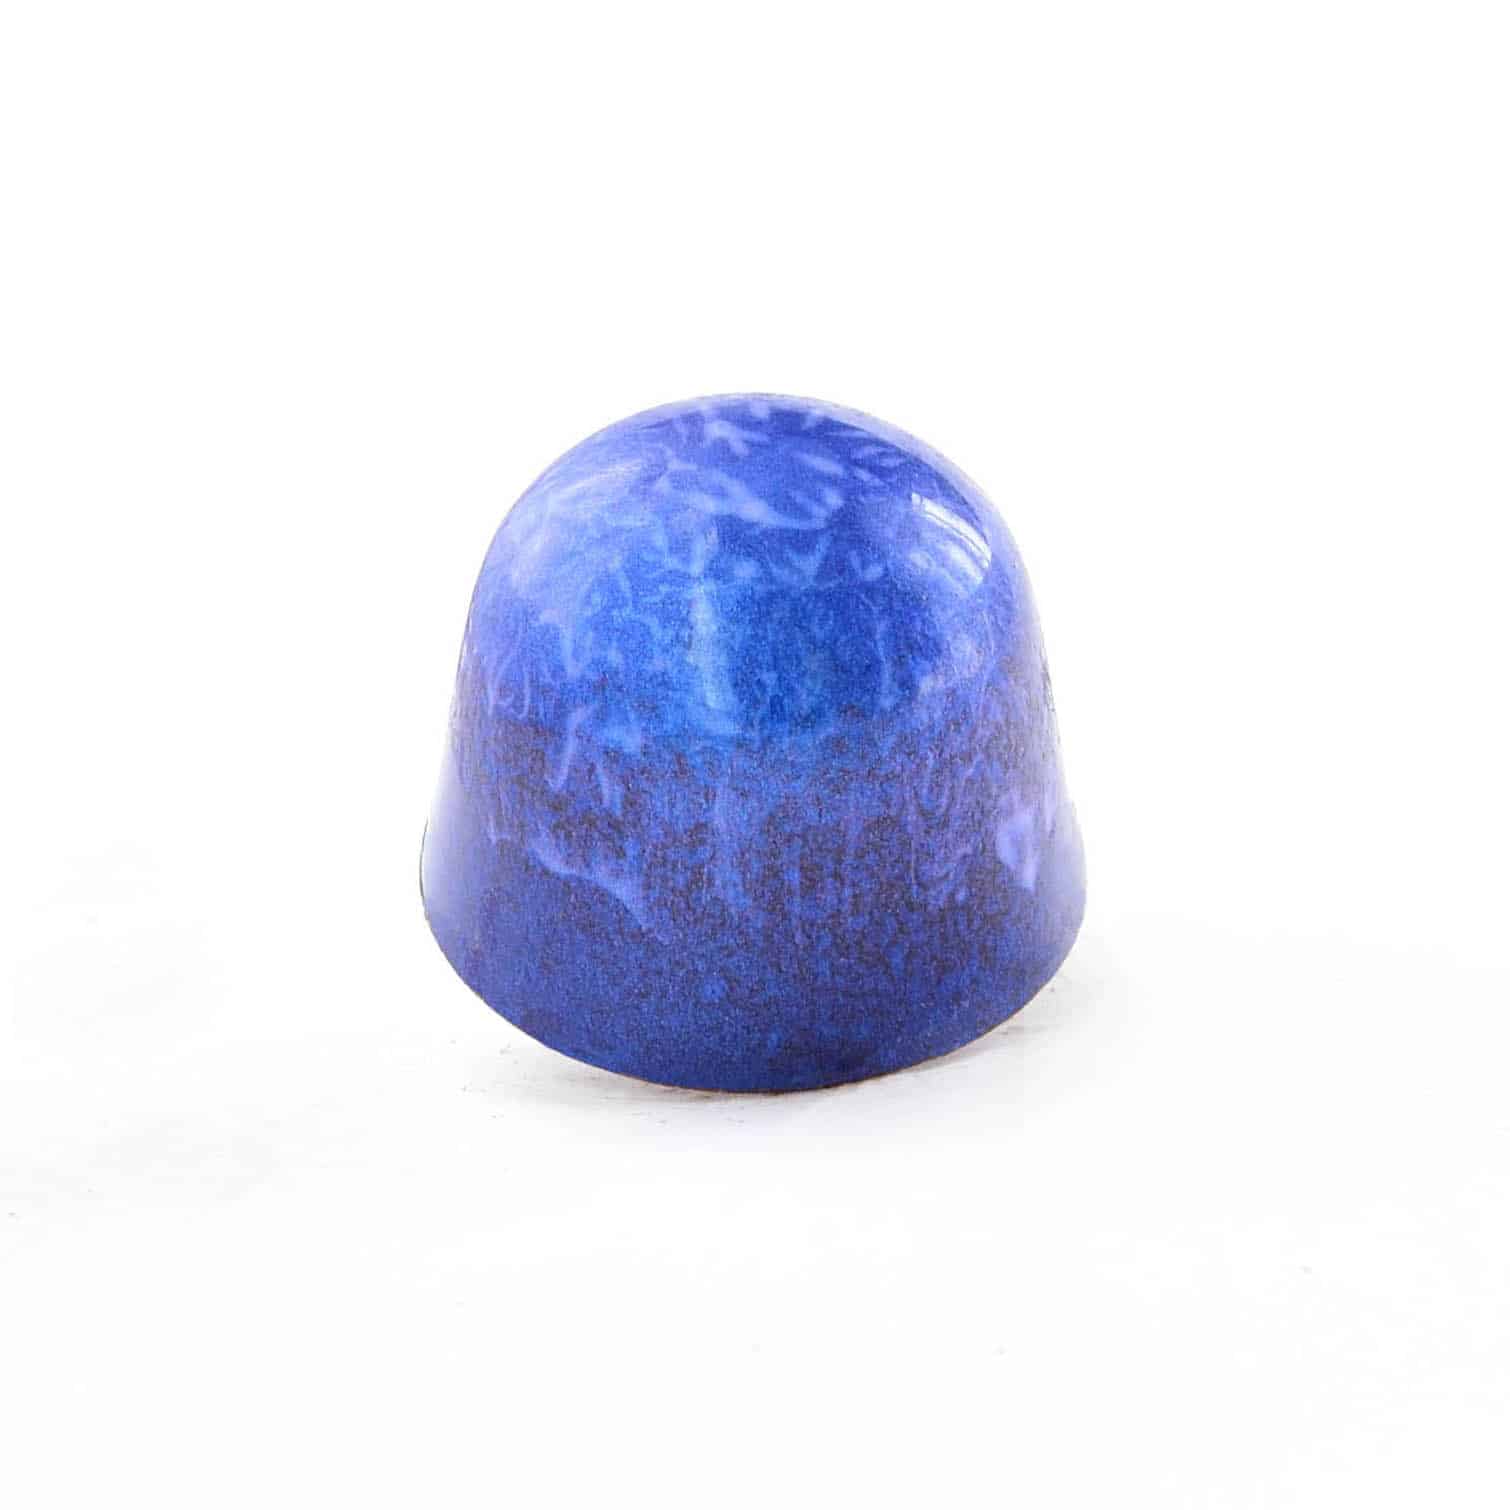 Side view of a bright blue gourmet chocolate truffle with brown swirls; truffle tastes like sweet coconut and almonds